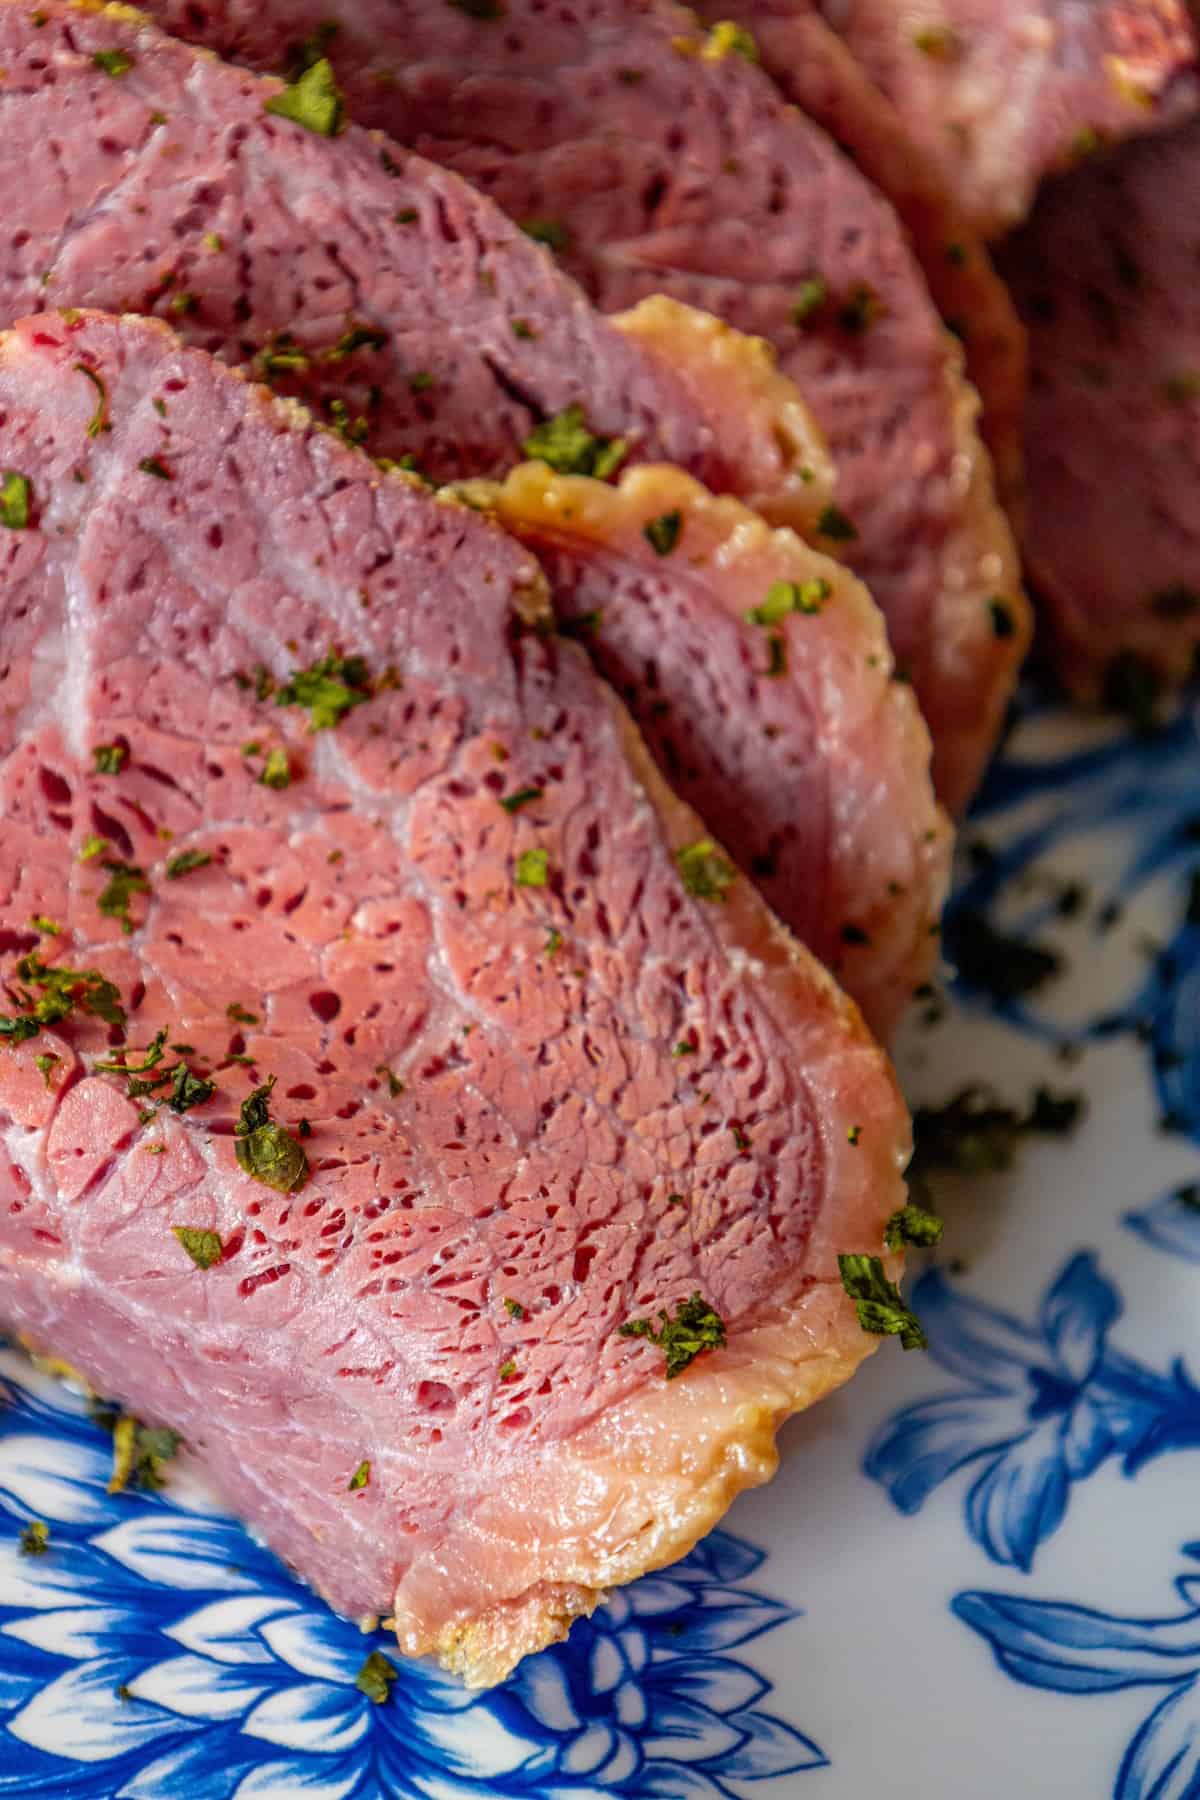 Sliced corned beef on a blue plate.